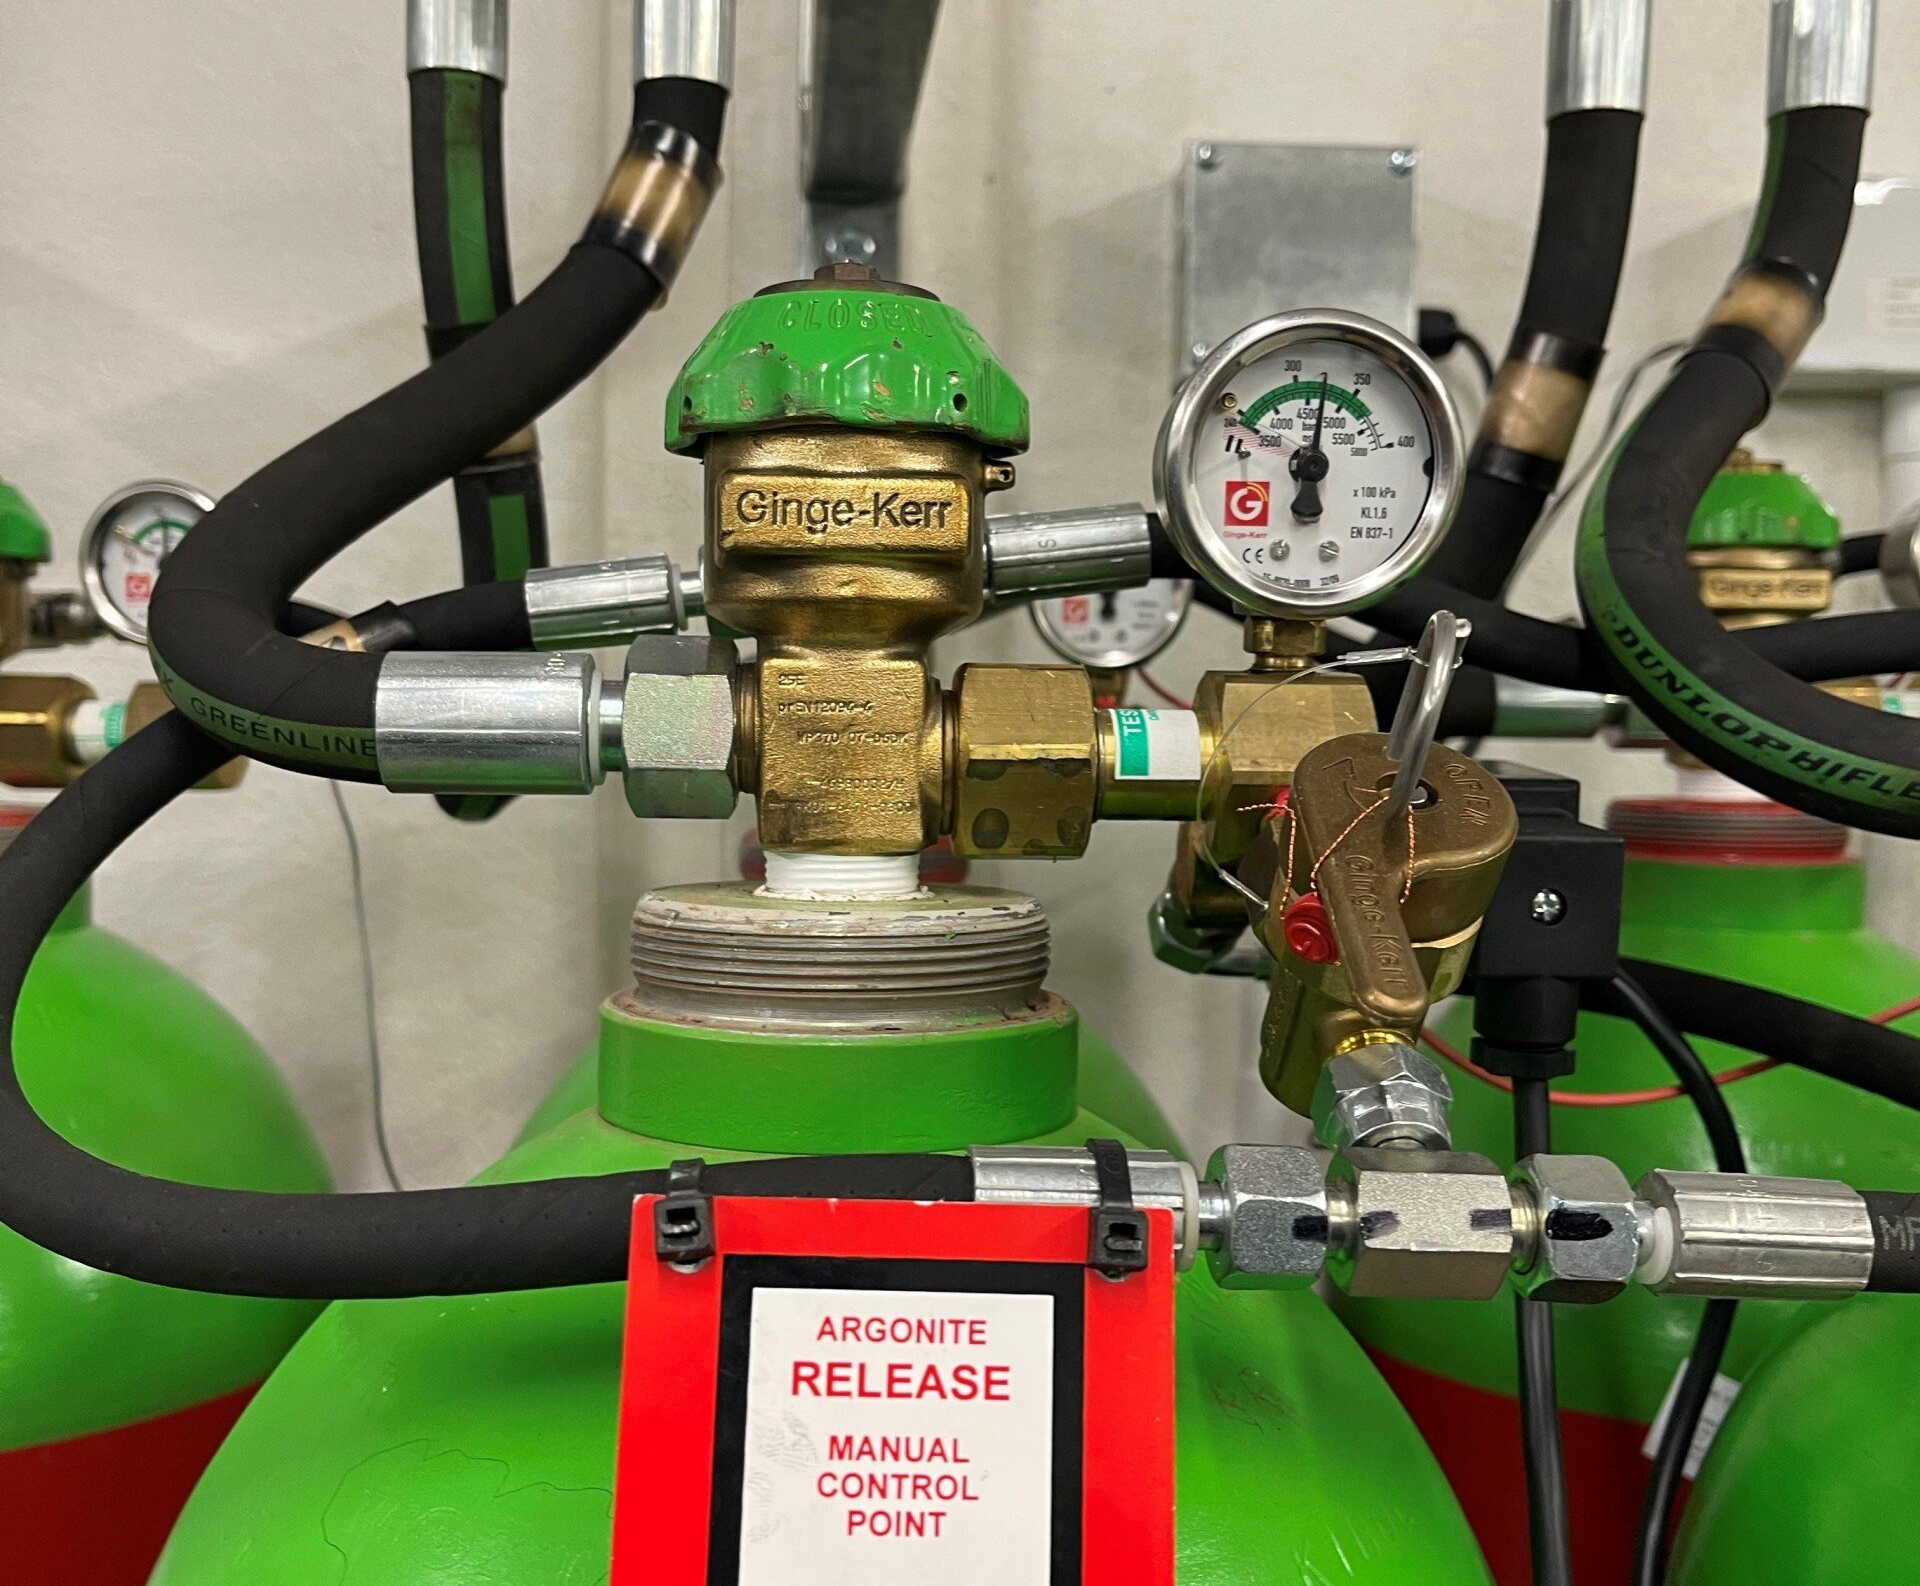 A close up of a gas cylinder with a sign that says ' aircraft release manual control point '